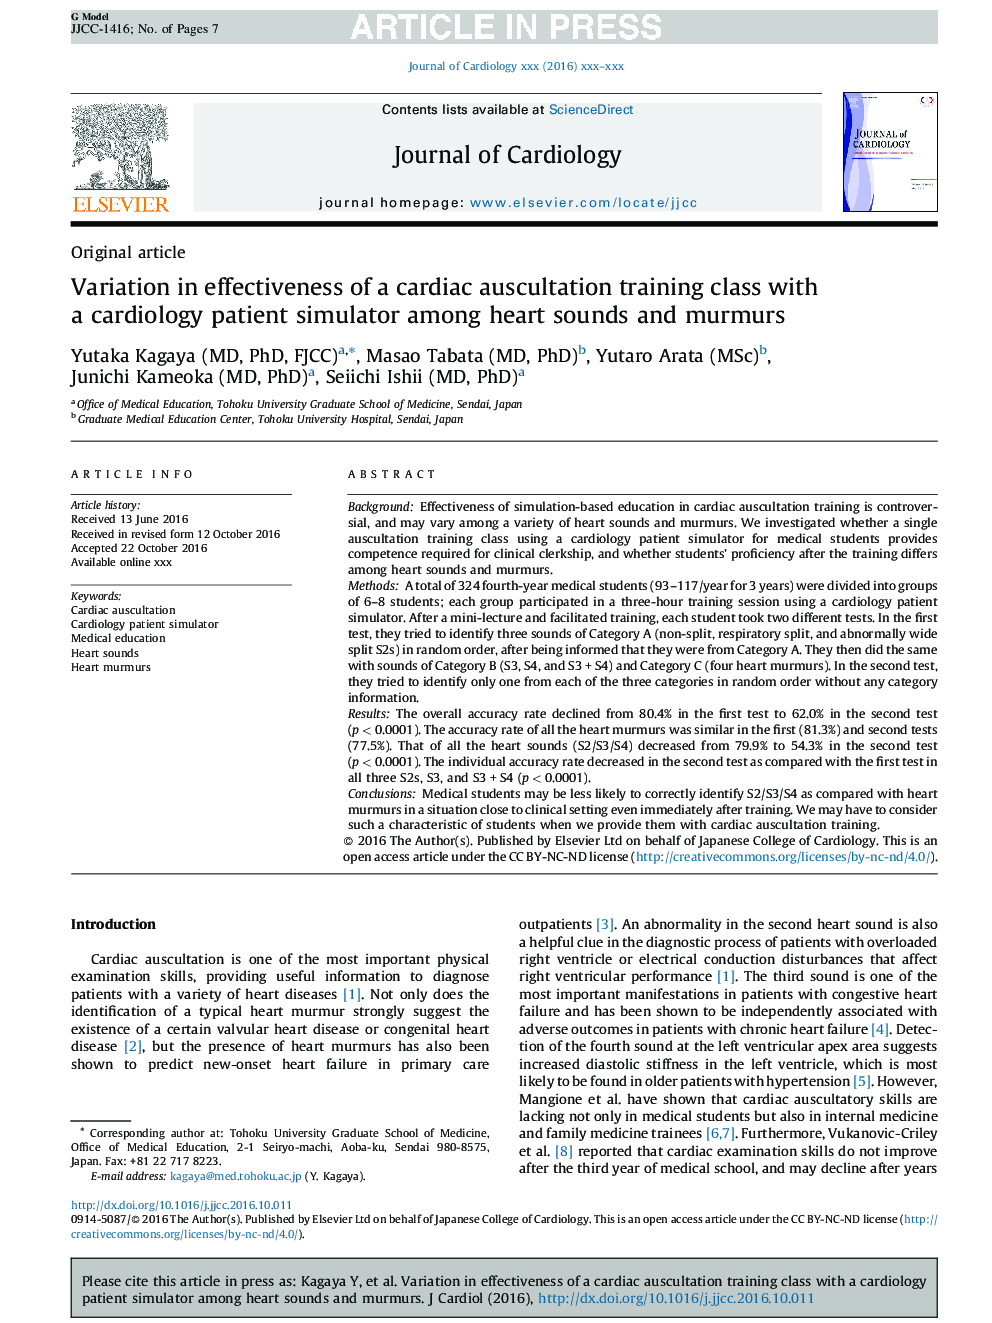 Variation in effectiveness of a cardiac auscultation training class with a cardiology patient simulator among heart sounds and murmurs